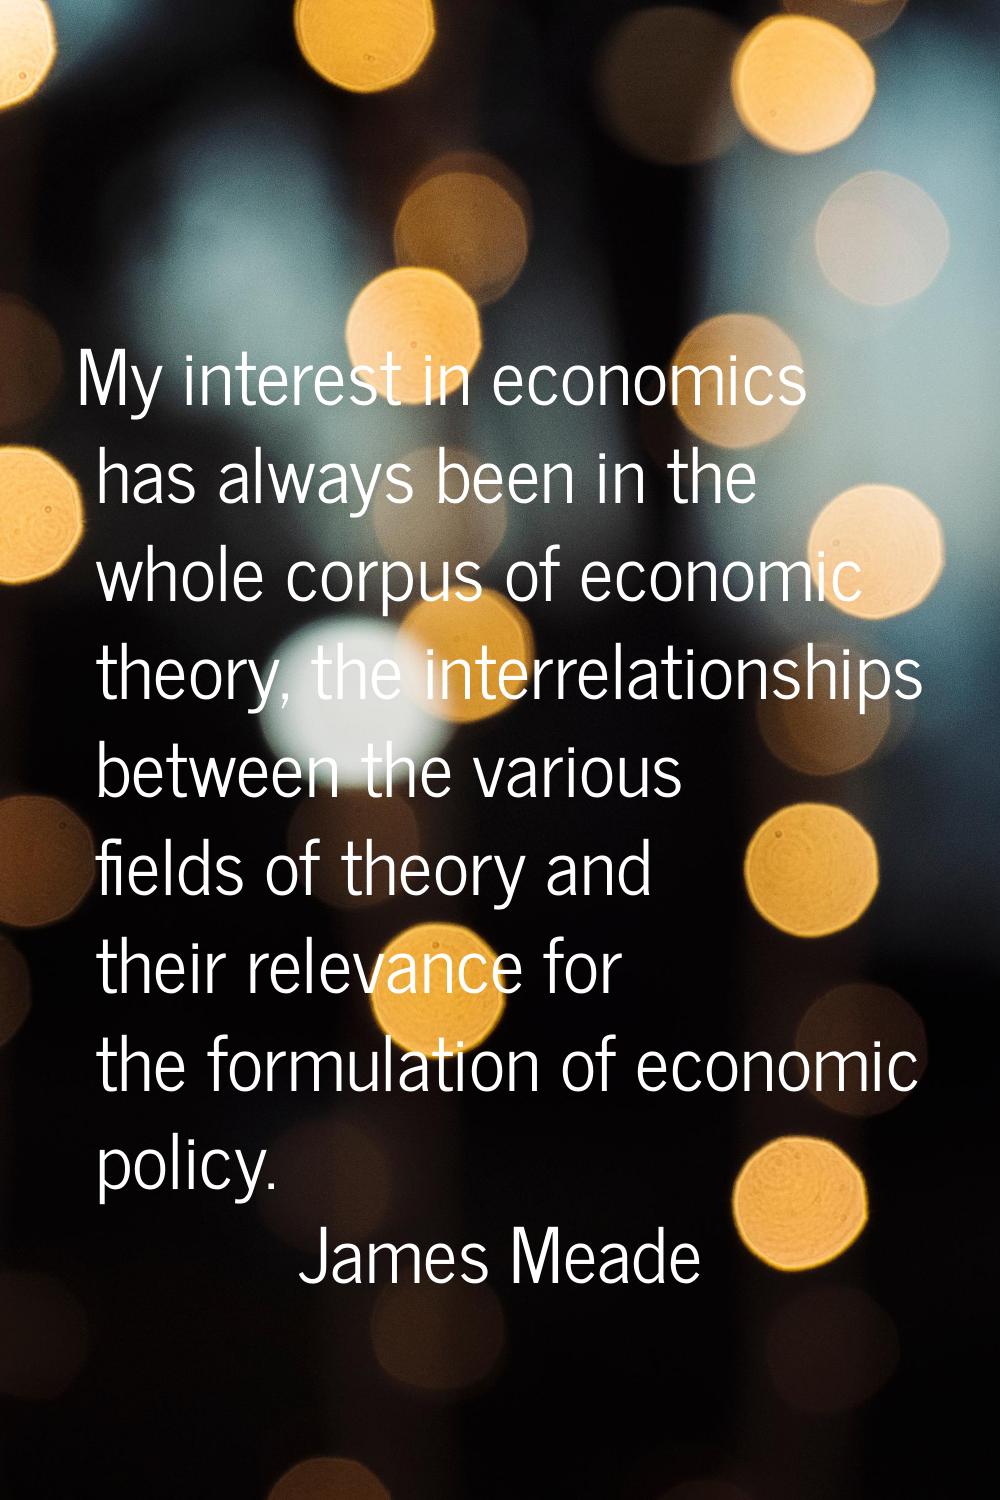 My interest in economics has always been in the whole corpus of economic theory, the interrelations